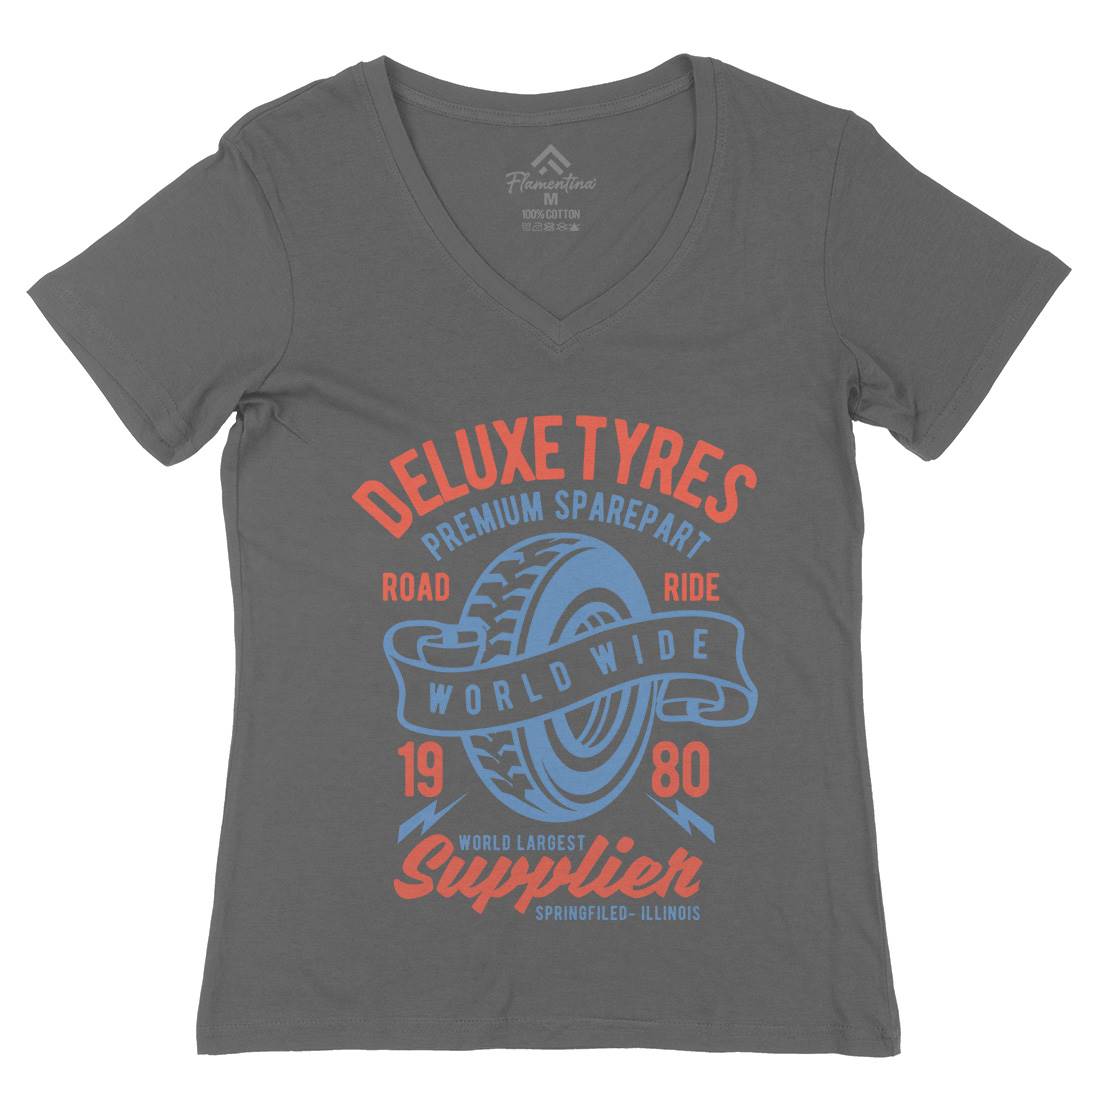 Deluxe Tyres Womens Organic V-Neck T-Shirt Cars B204